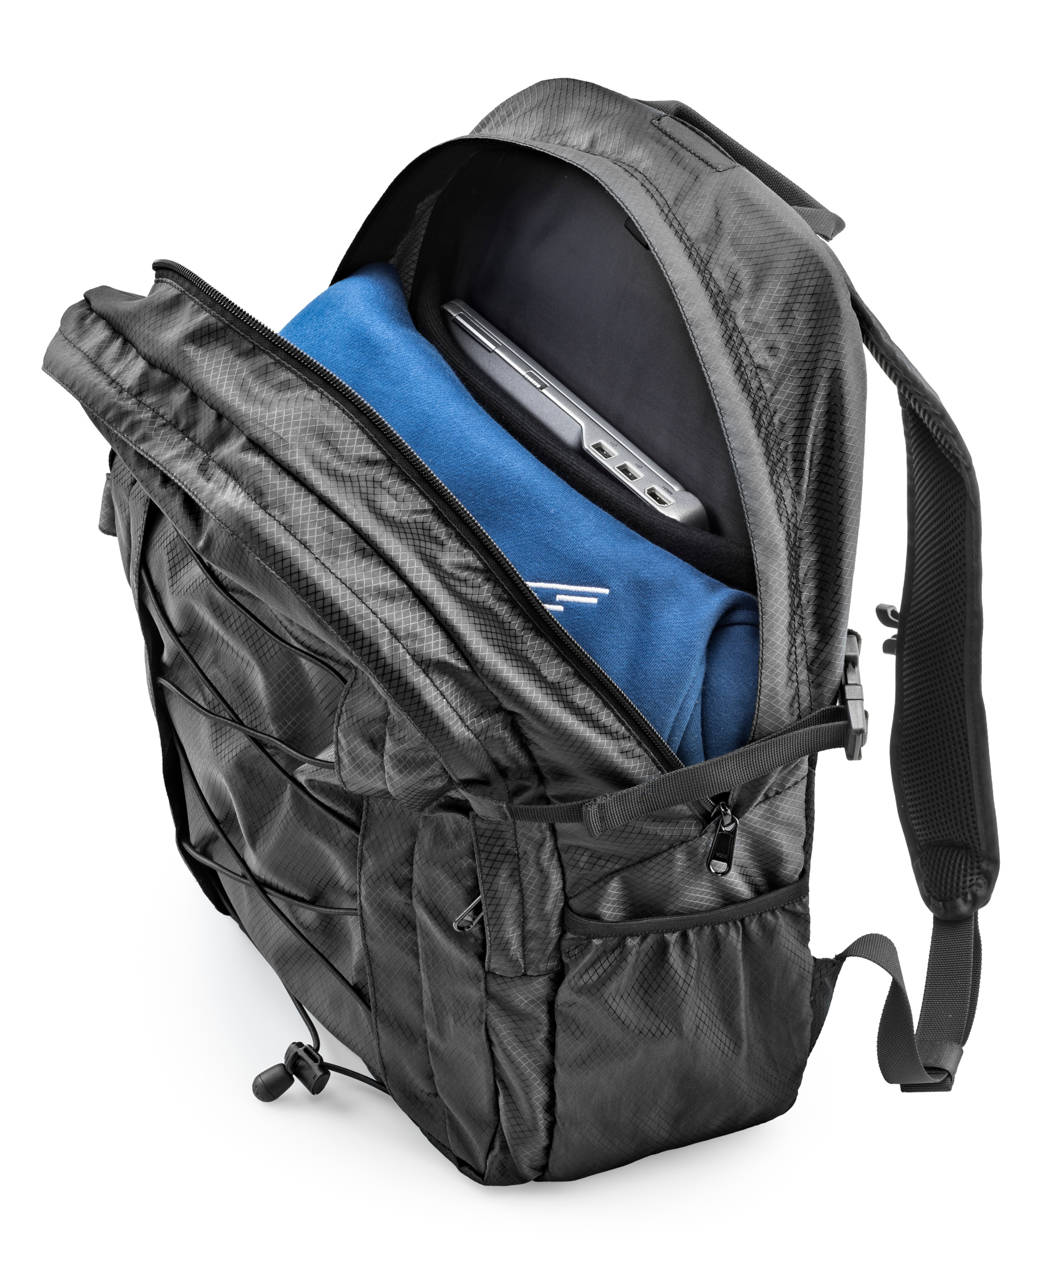 D.FIVE CITIZEN BACKPACK - BLACK | Trekking \ Backpacks and suitcases ...